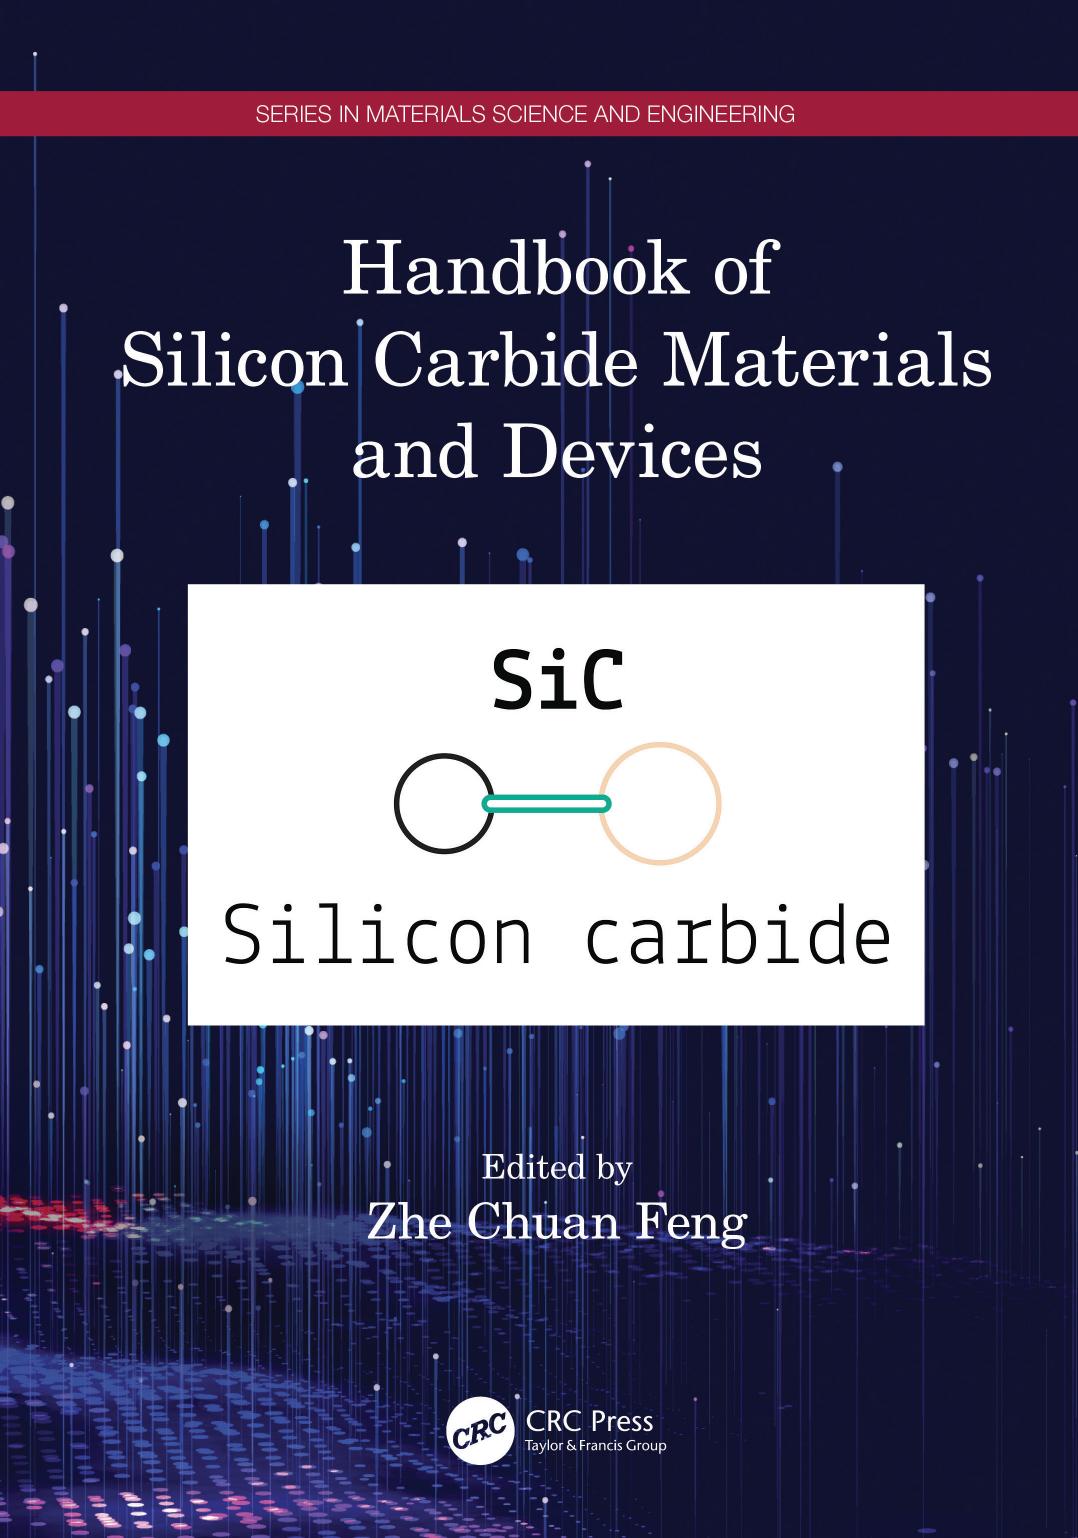 Handbook of Silicon Carbide Materials and Devices by Zhe Chuan Feng